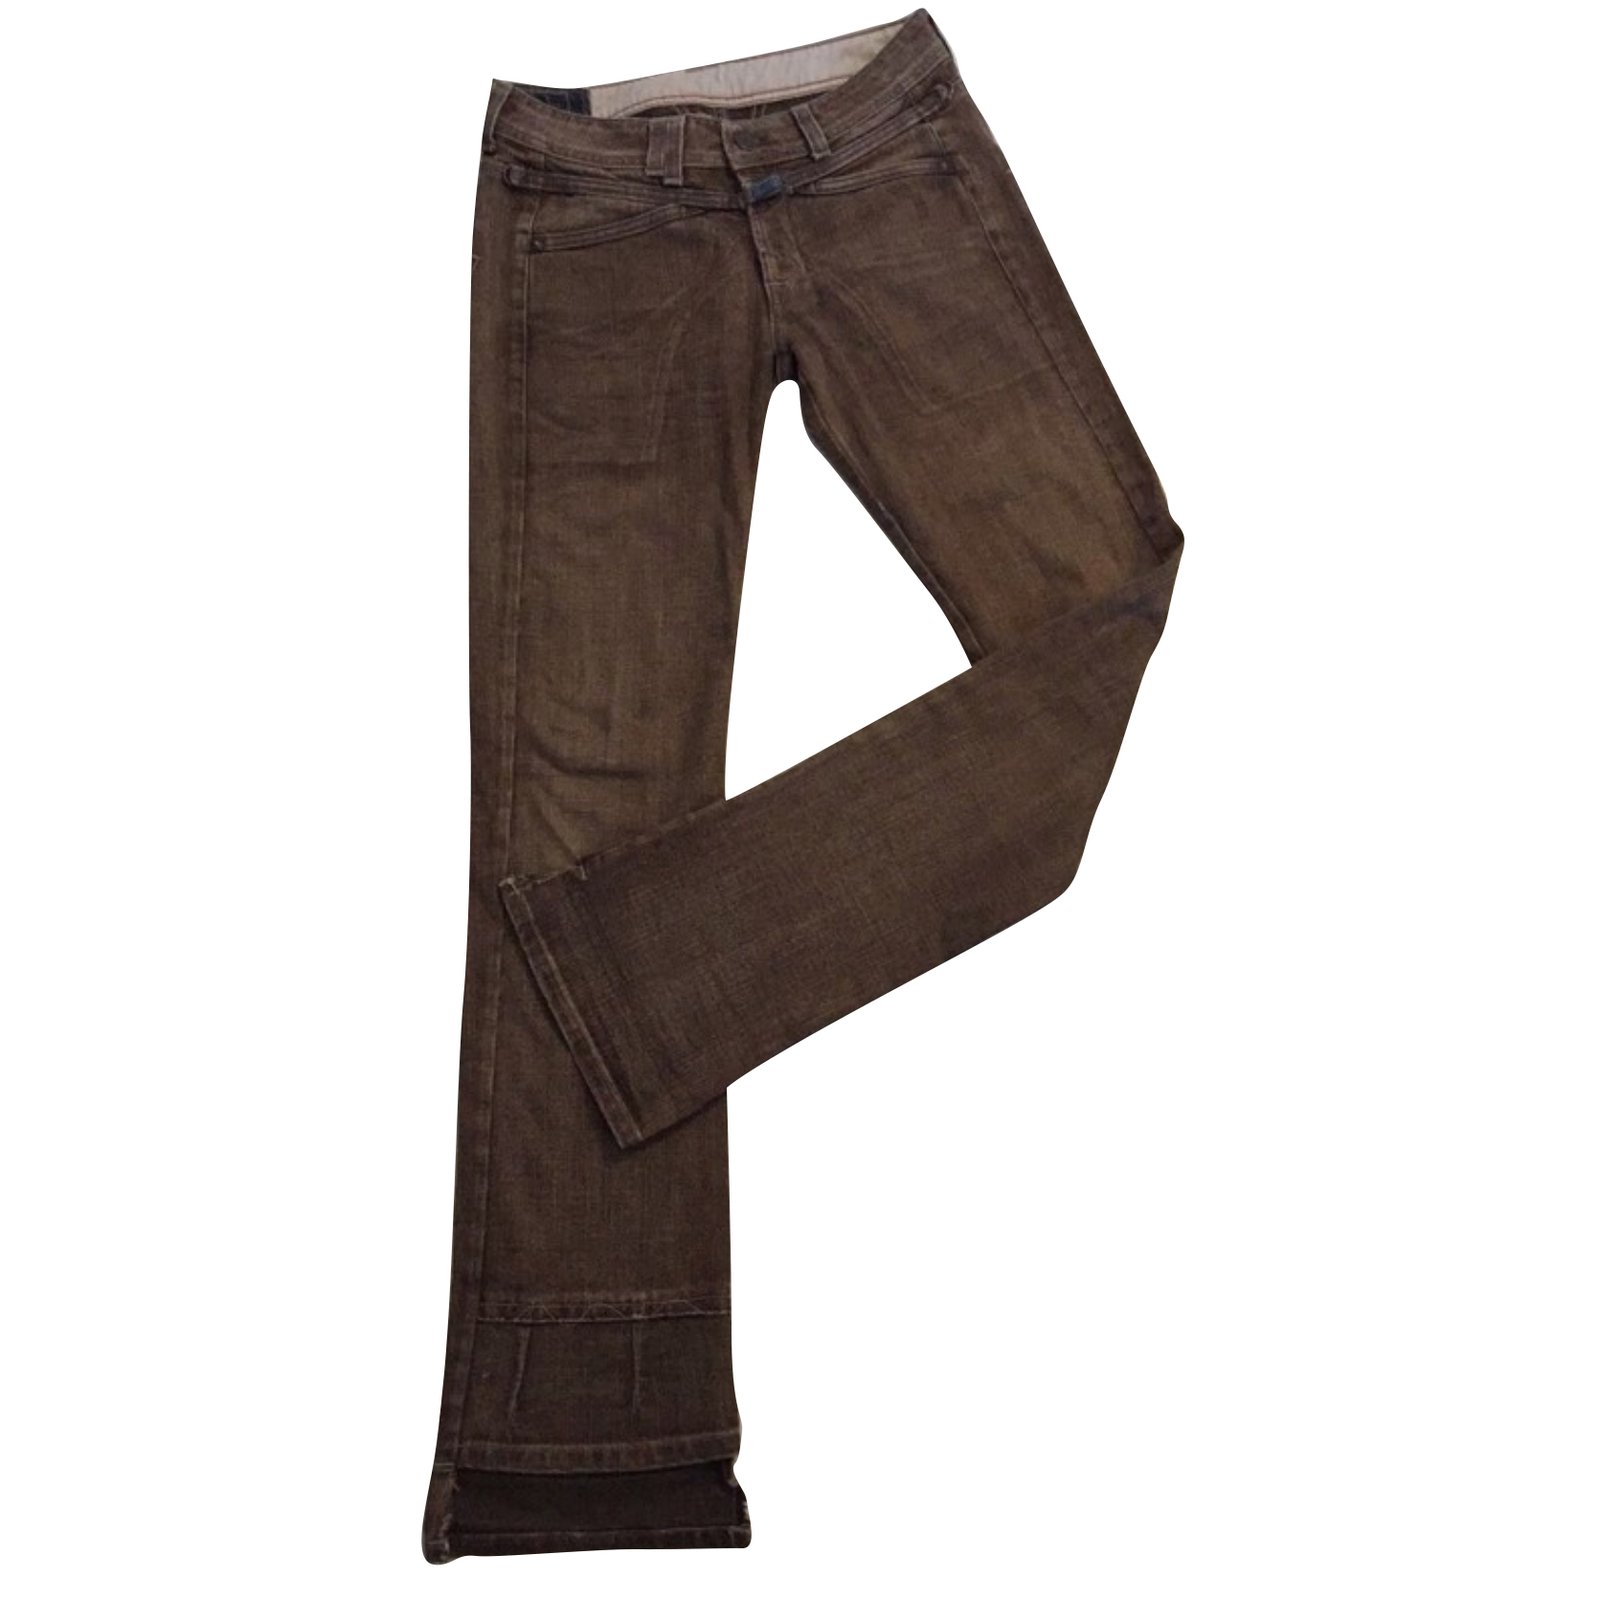 Le Jeande Marithe Francois Girbaud Jersey Pants brown business style Fashion Trousers Jersey Pants 